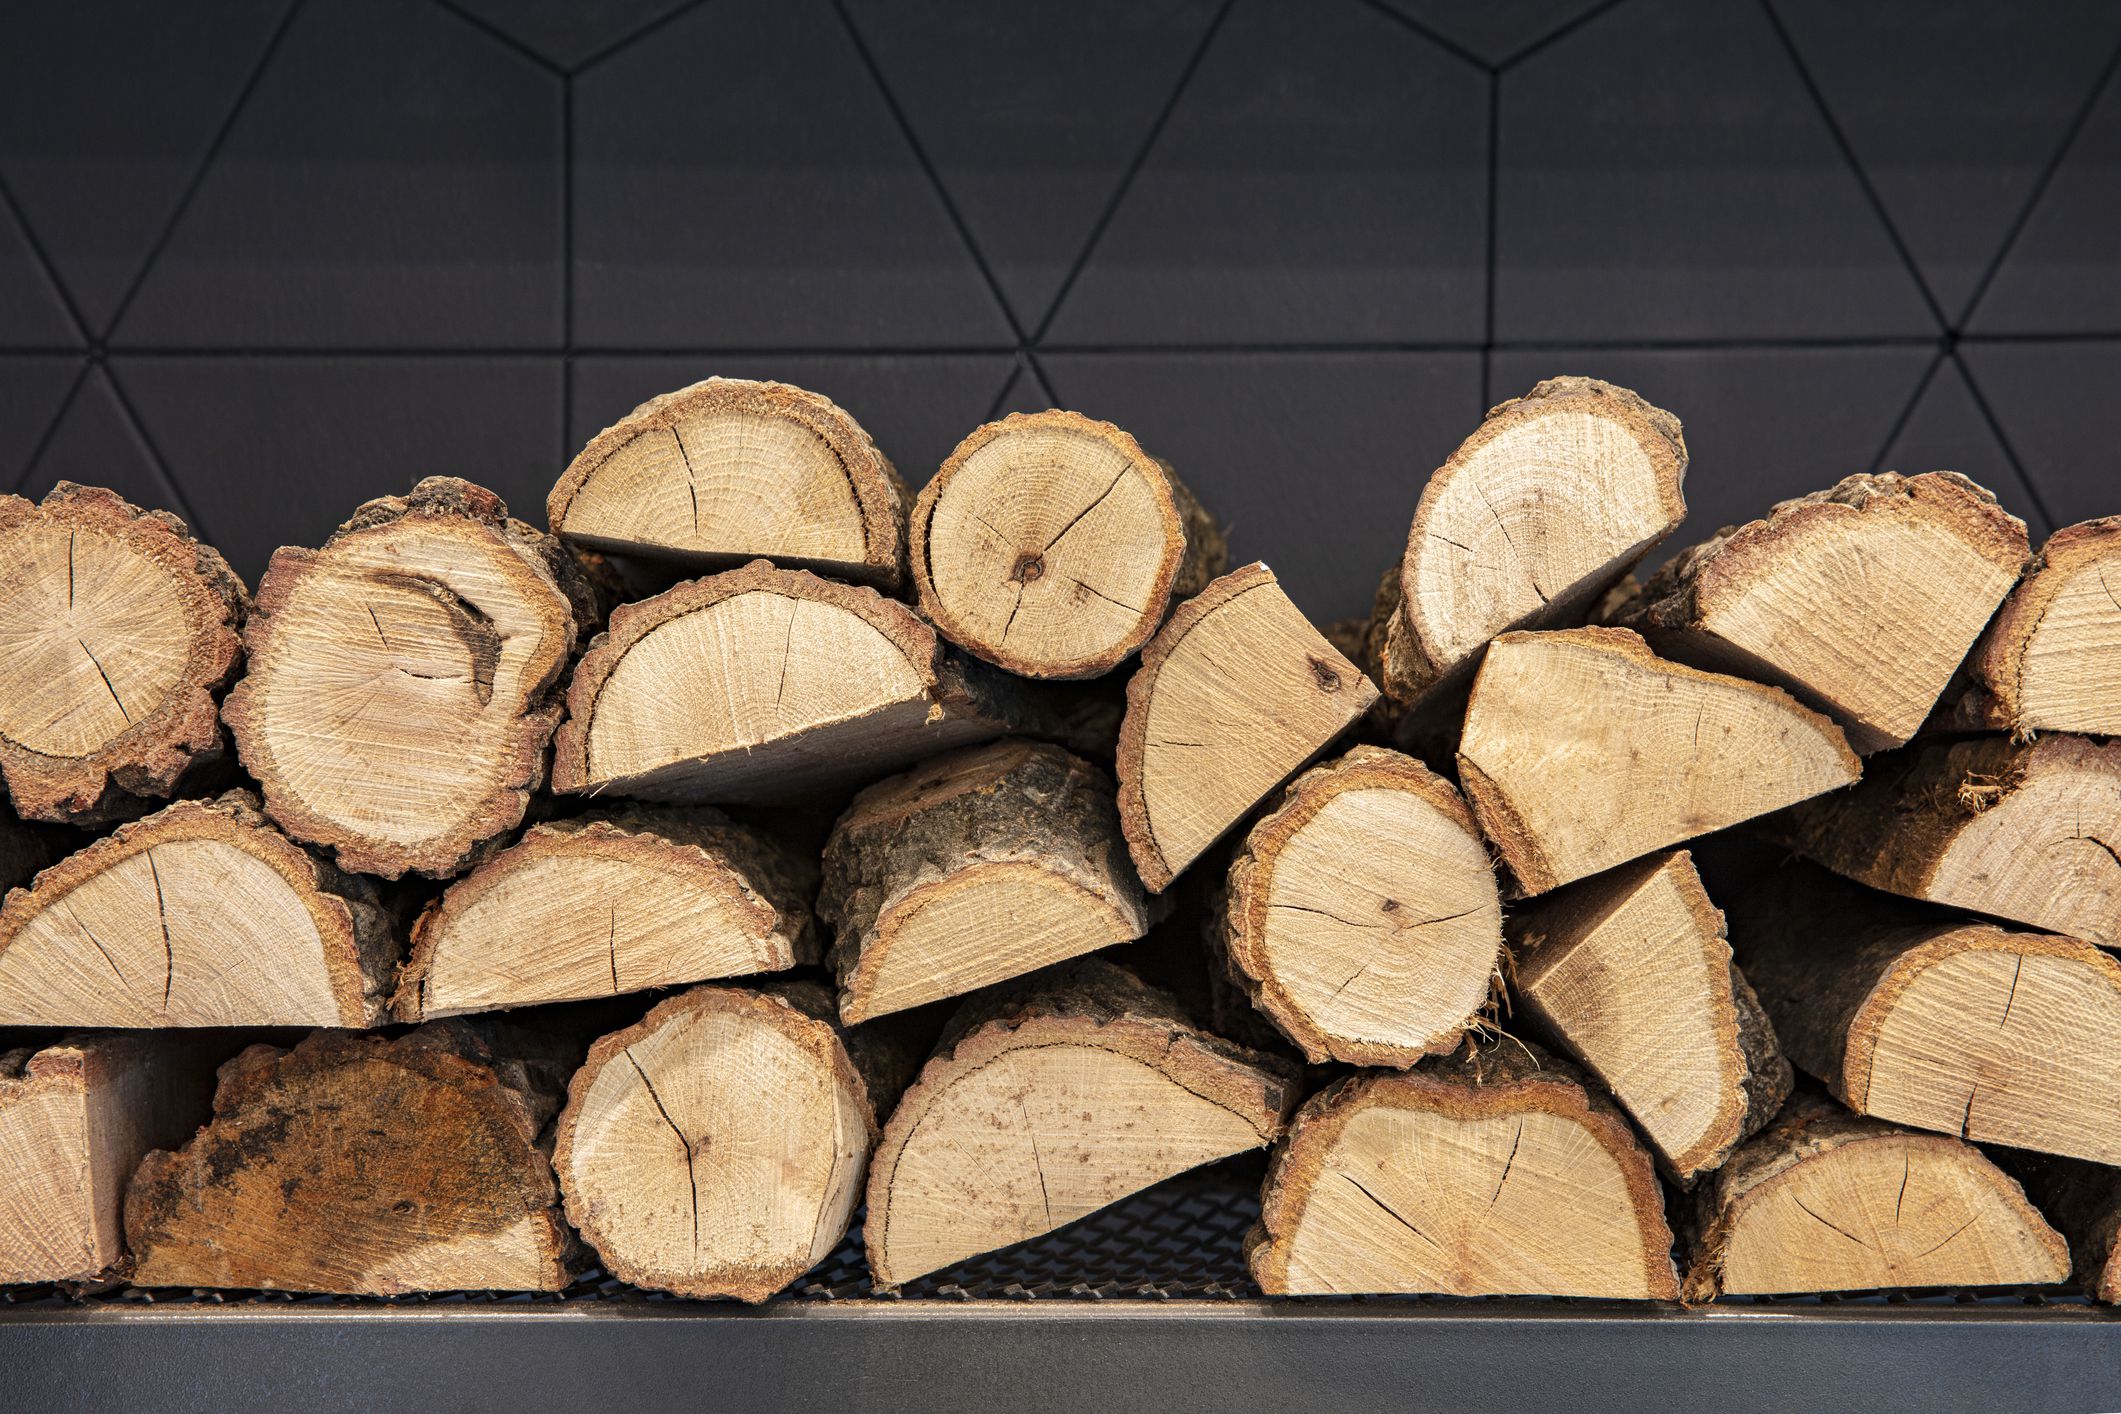 Fireplace Store San Antonio Luxury 5 Places to Find Free Firewood Near You